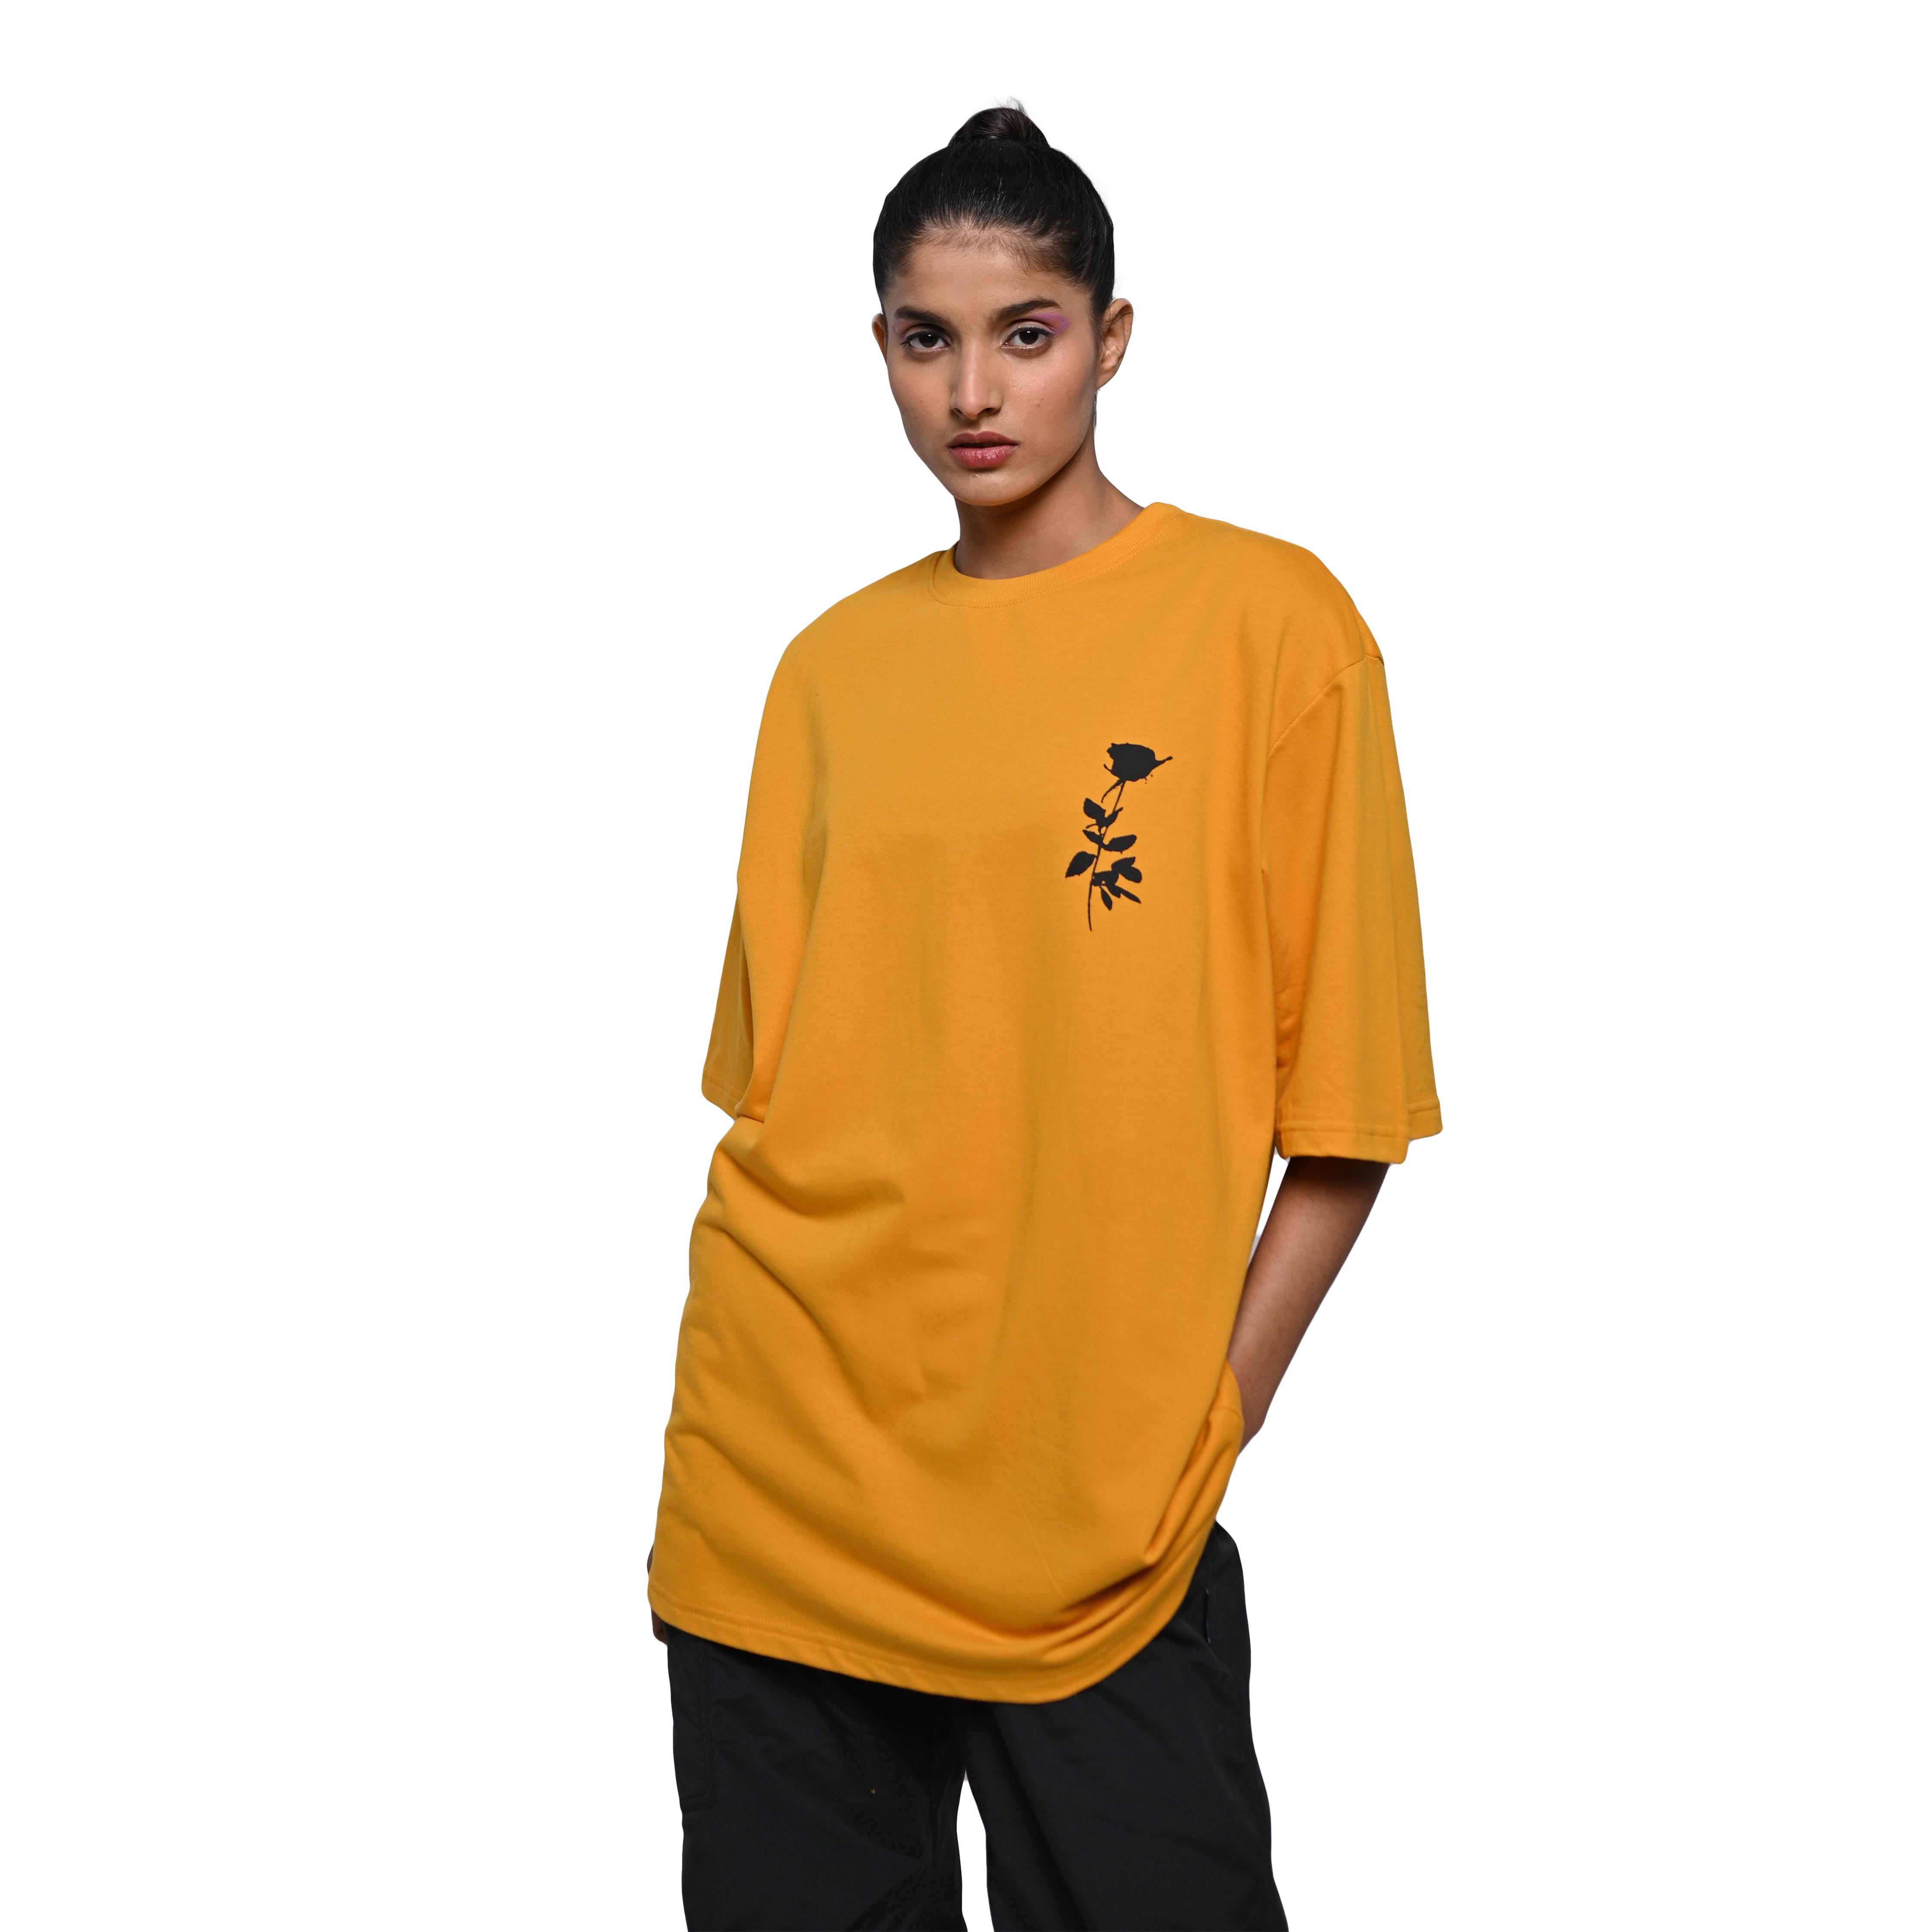 Oversized yellow t-shirt with Afterthought style print on the front side